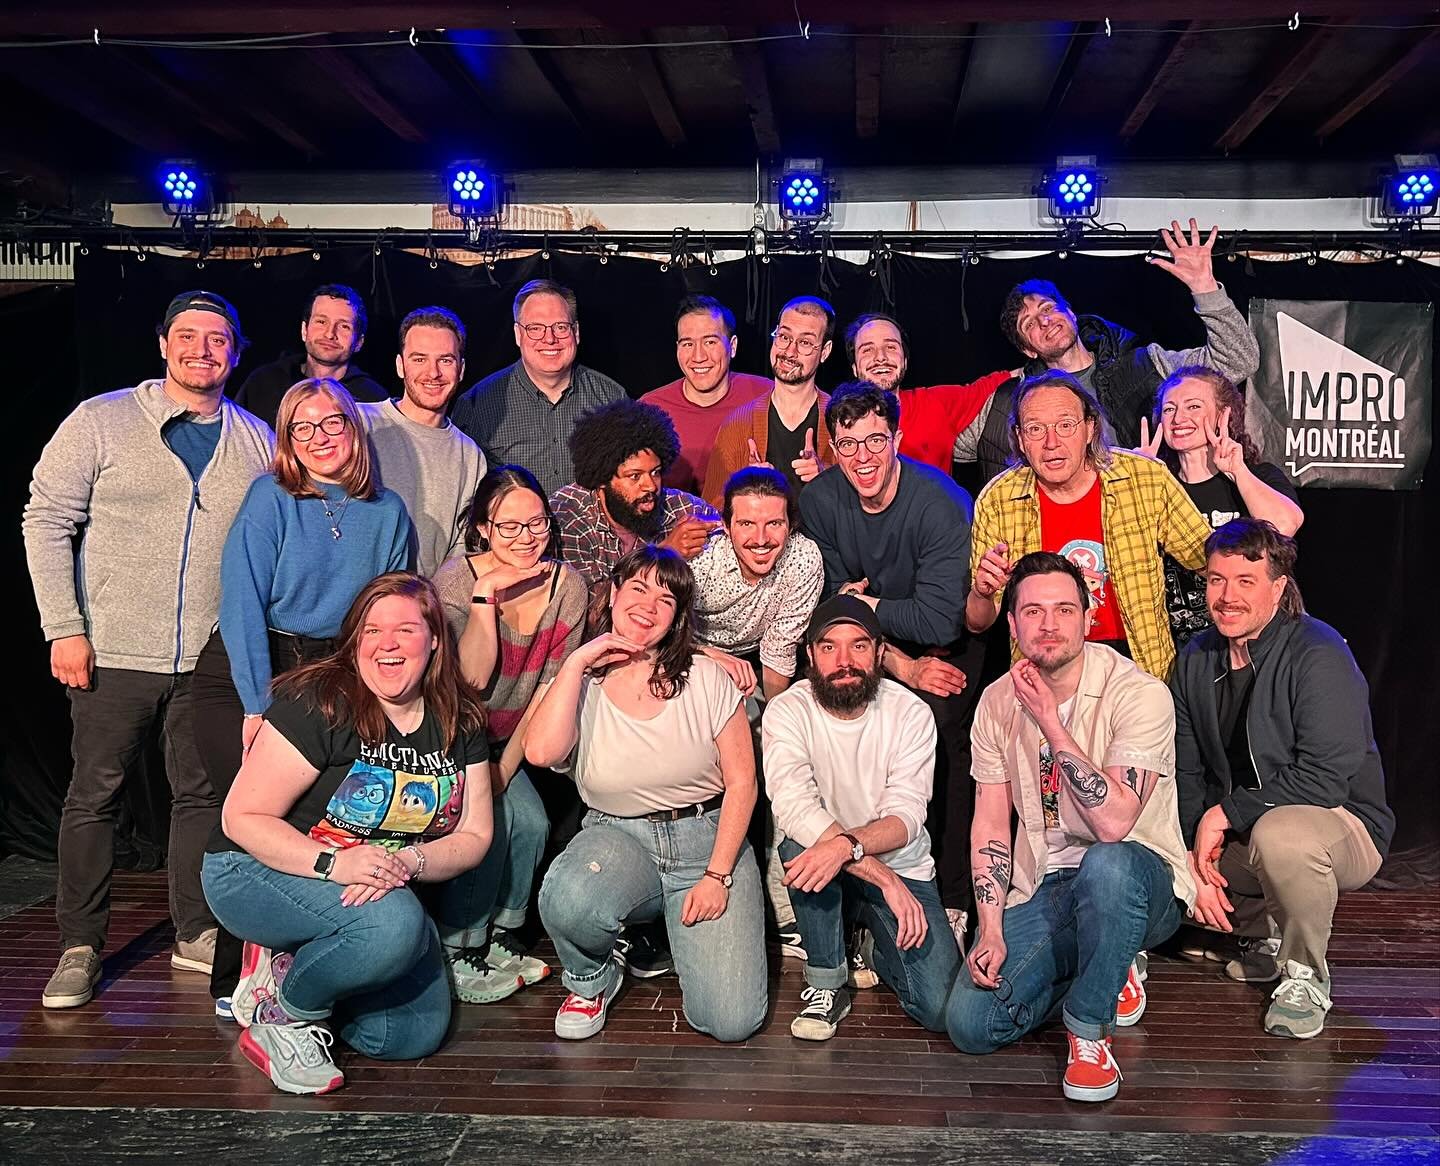 Cheers to the cast of Mix &amp; Match: An Improv Scramble! 🤩And special thanks to the folks from the audience who signed up to play in the second half of tonight&rsquo;s show! 🥳

We had a couple of folks try improv for the first time!! On our stage